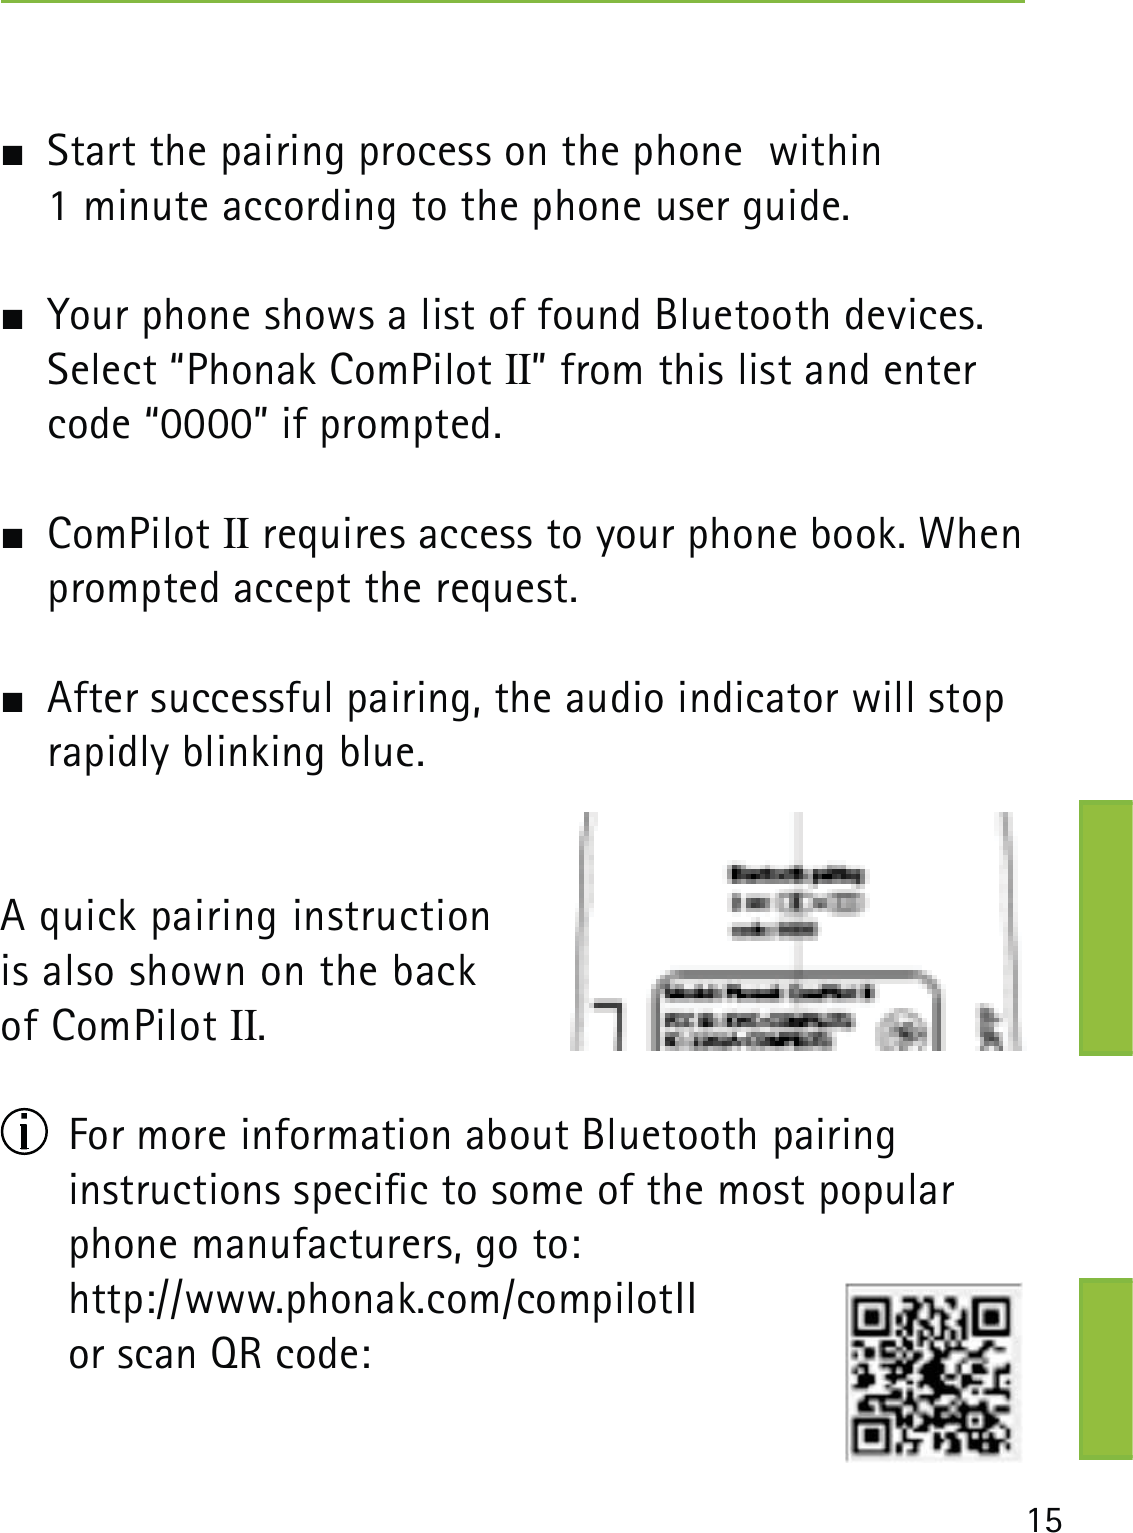 15  Start the pairing process on the phone  within  1 minute according to the phone user guide.  Your phone shows a list of found Bluetooth devices. Select “Phonak ComPilot II” from this list and enter code “0000” if prompted. ComPilot II requires access to your phone book. When prompted accept the request.  After successful pairing, the audio indicator will stop rapidly blinking blue.A quick pairing instruction  is also shown on the back of ComPilot II.  For more information about Bluetooth pairing  instructions specic to some of the most popular phone manufacturers, go to: http://www.phonak.com/compilotII    or scan QR code: 